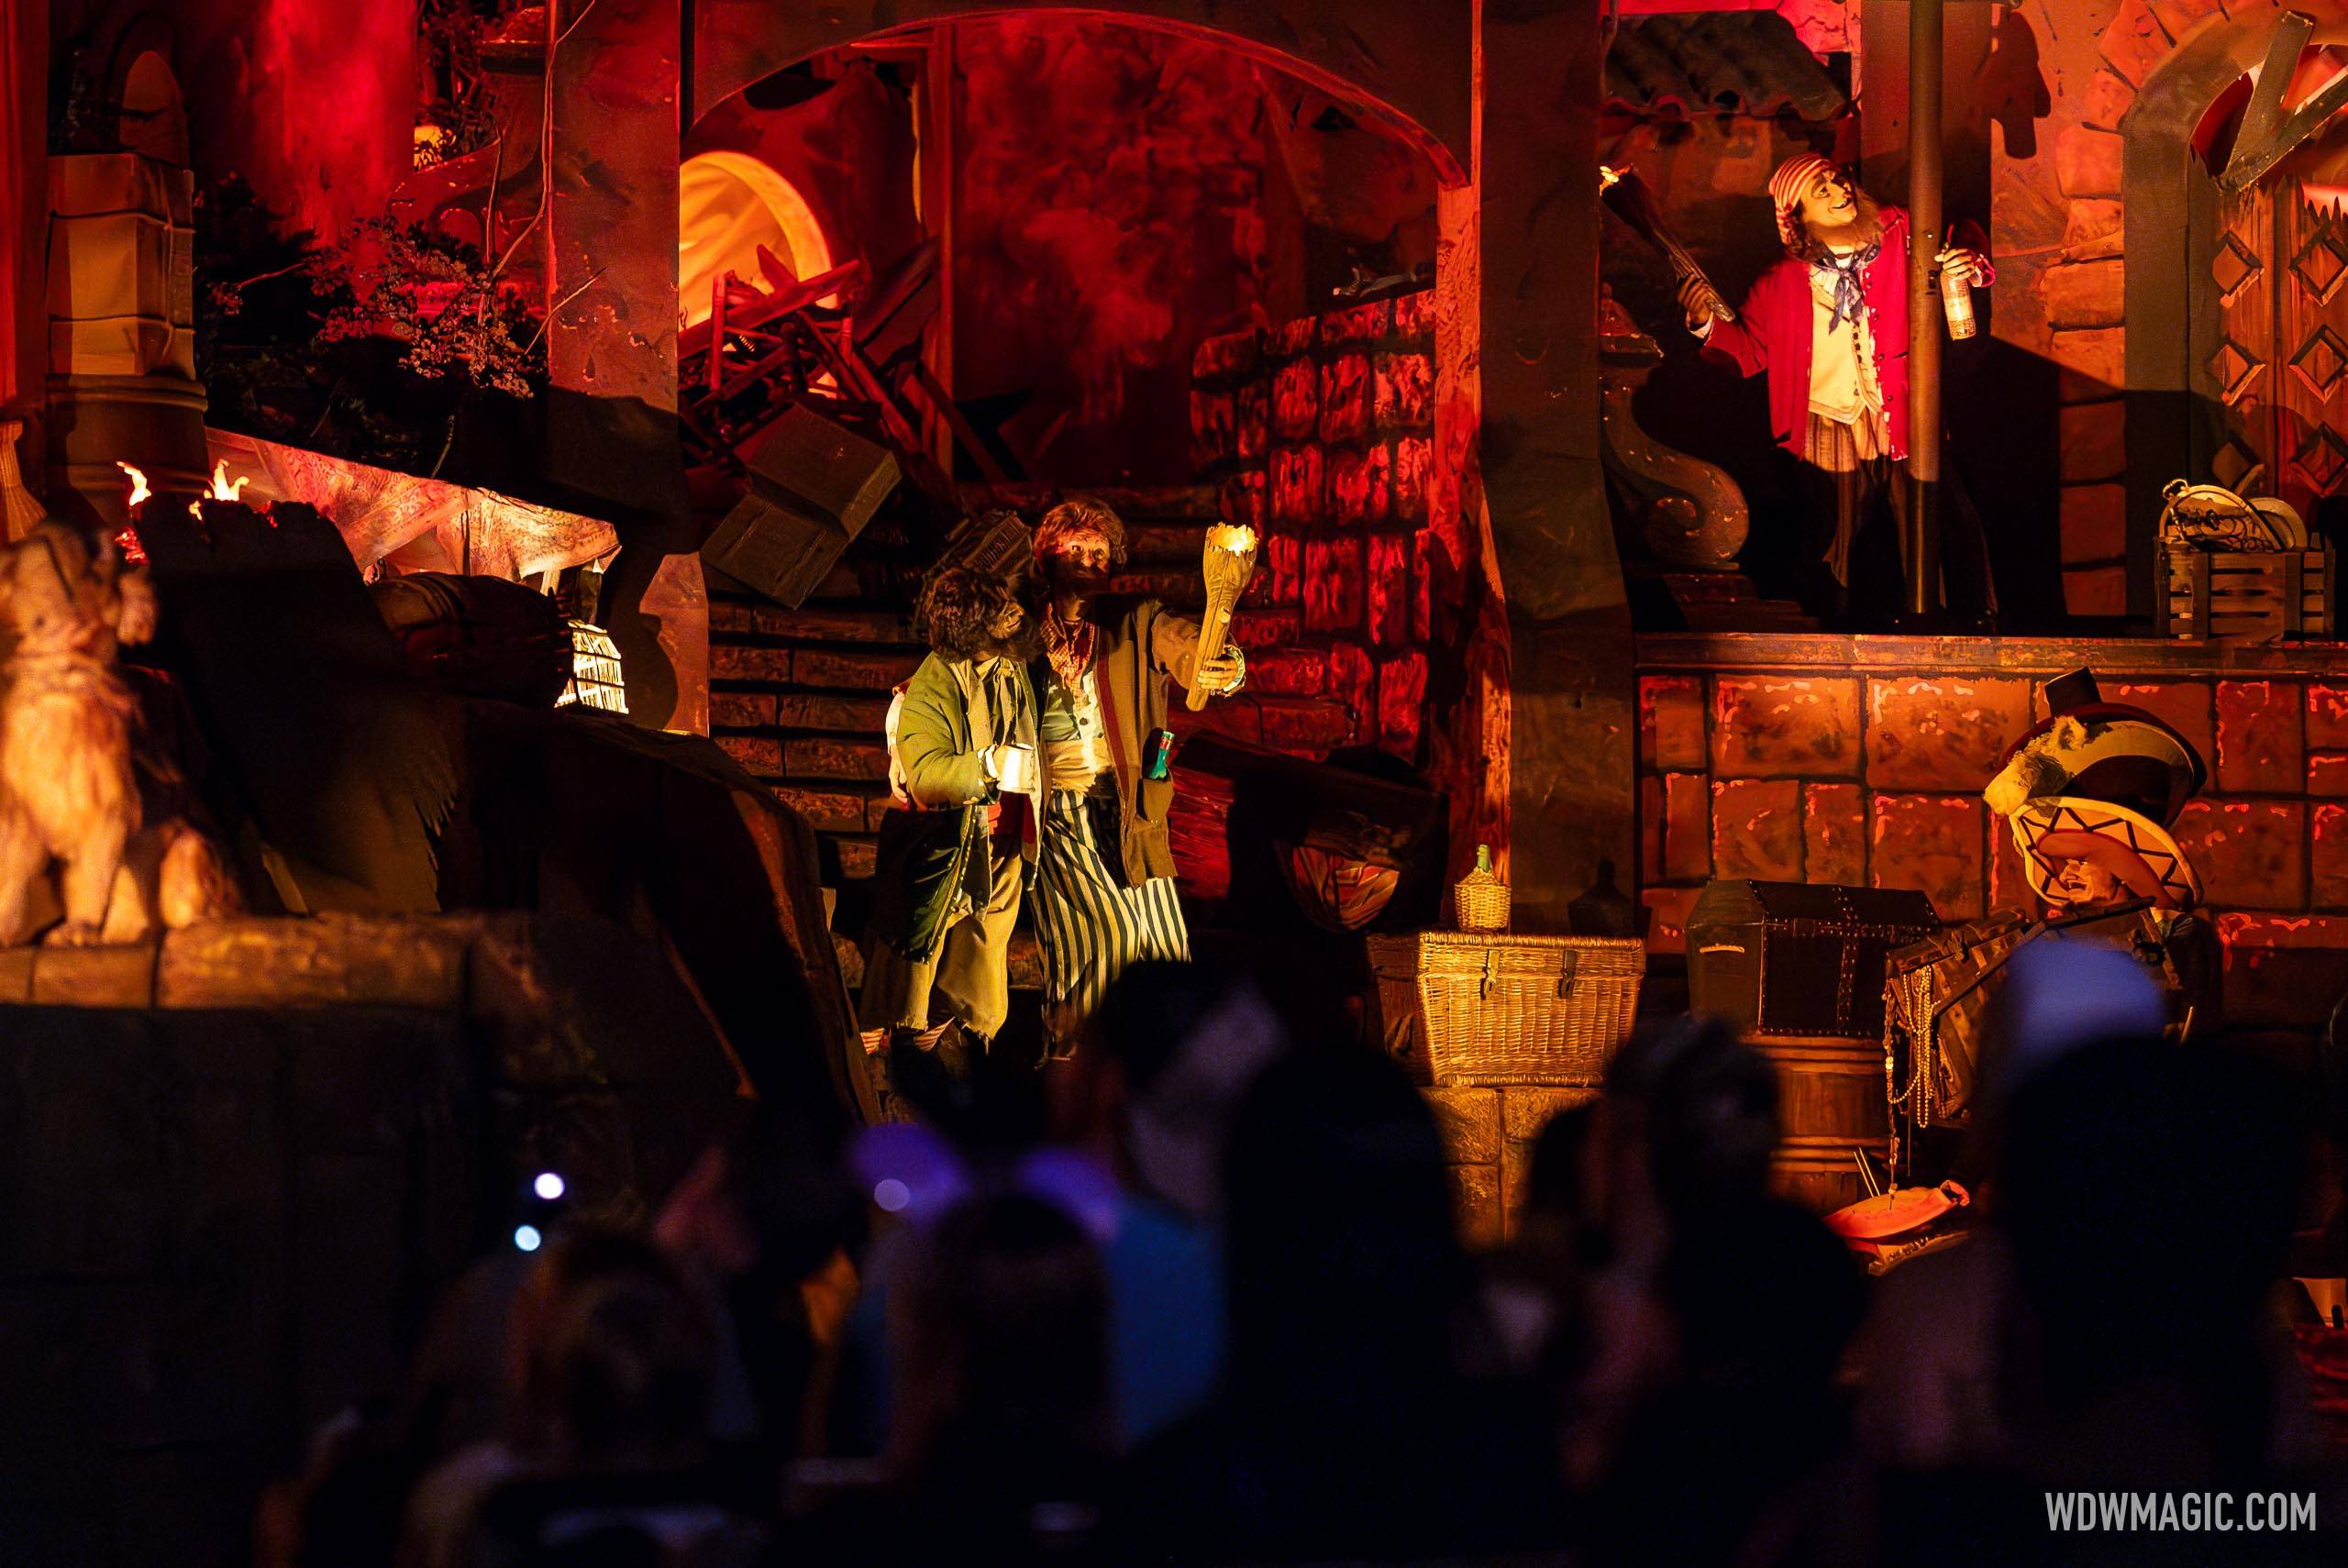 VIDEO - Take a ride through of the new auction scene at Pirates of the Caribbean